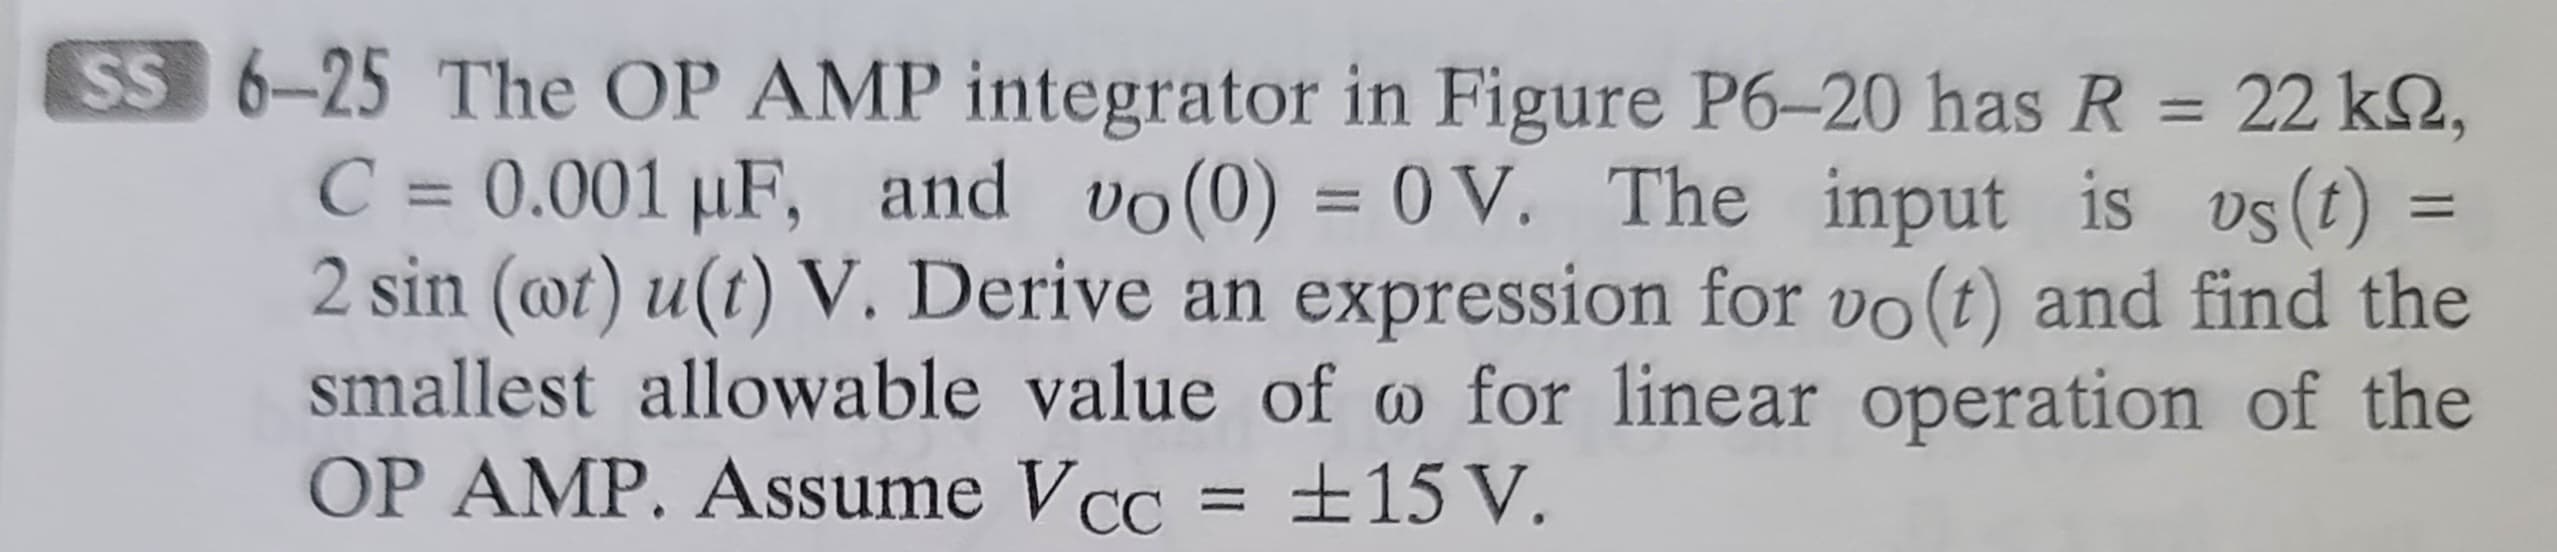 SS 6-25 The OP AMP integrator in Figure P6-20 has R = 22 k,
C = 0.001 µF, and vo(0) = 0V. The input is vs(t)
2 sin (wt) u(t) V. Derive an expression for vo(t) and find the
smallest allowable value of w for linear operation of the
OP AMP. Assume Vcc ±15 V.